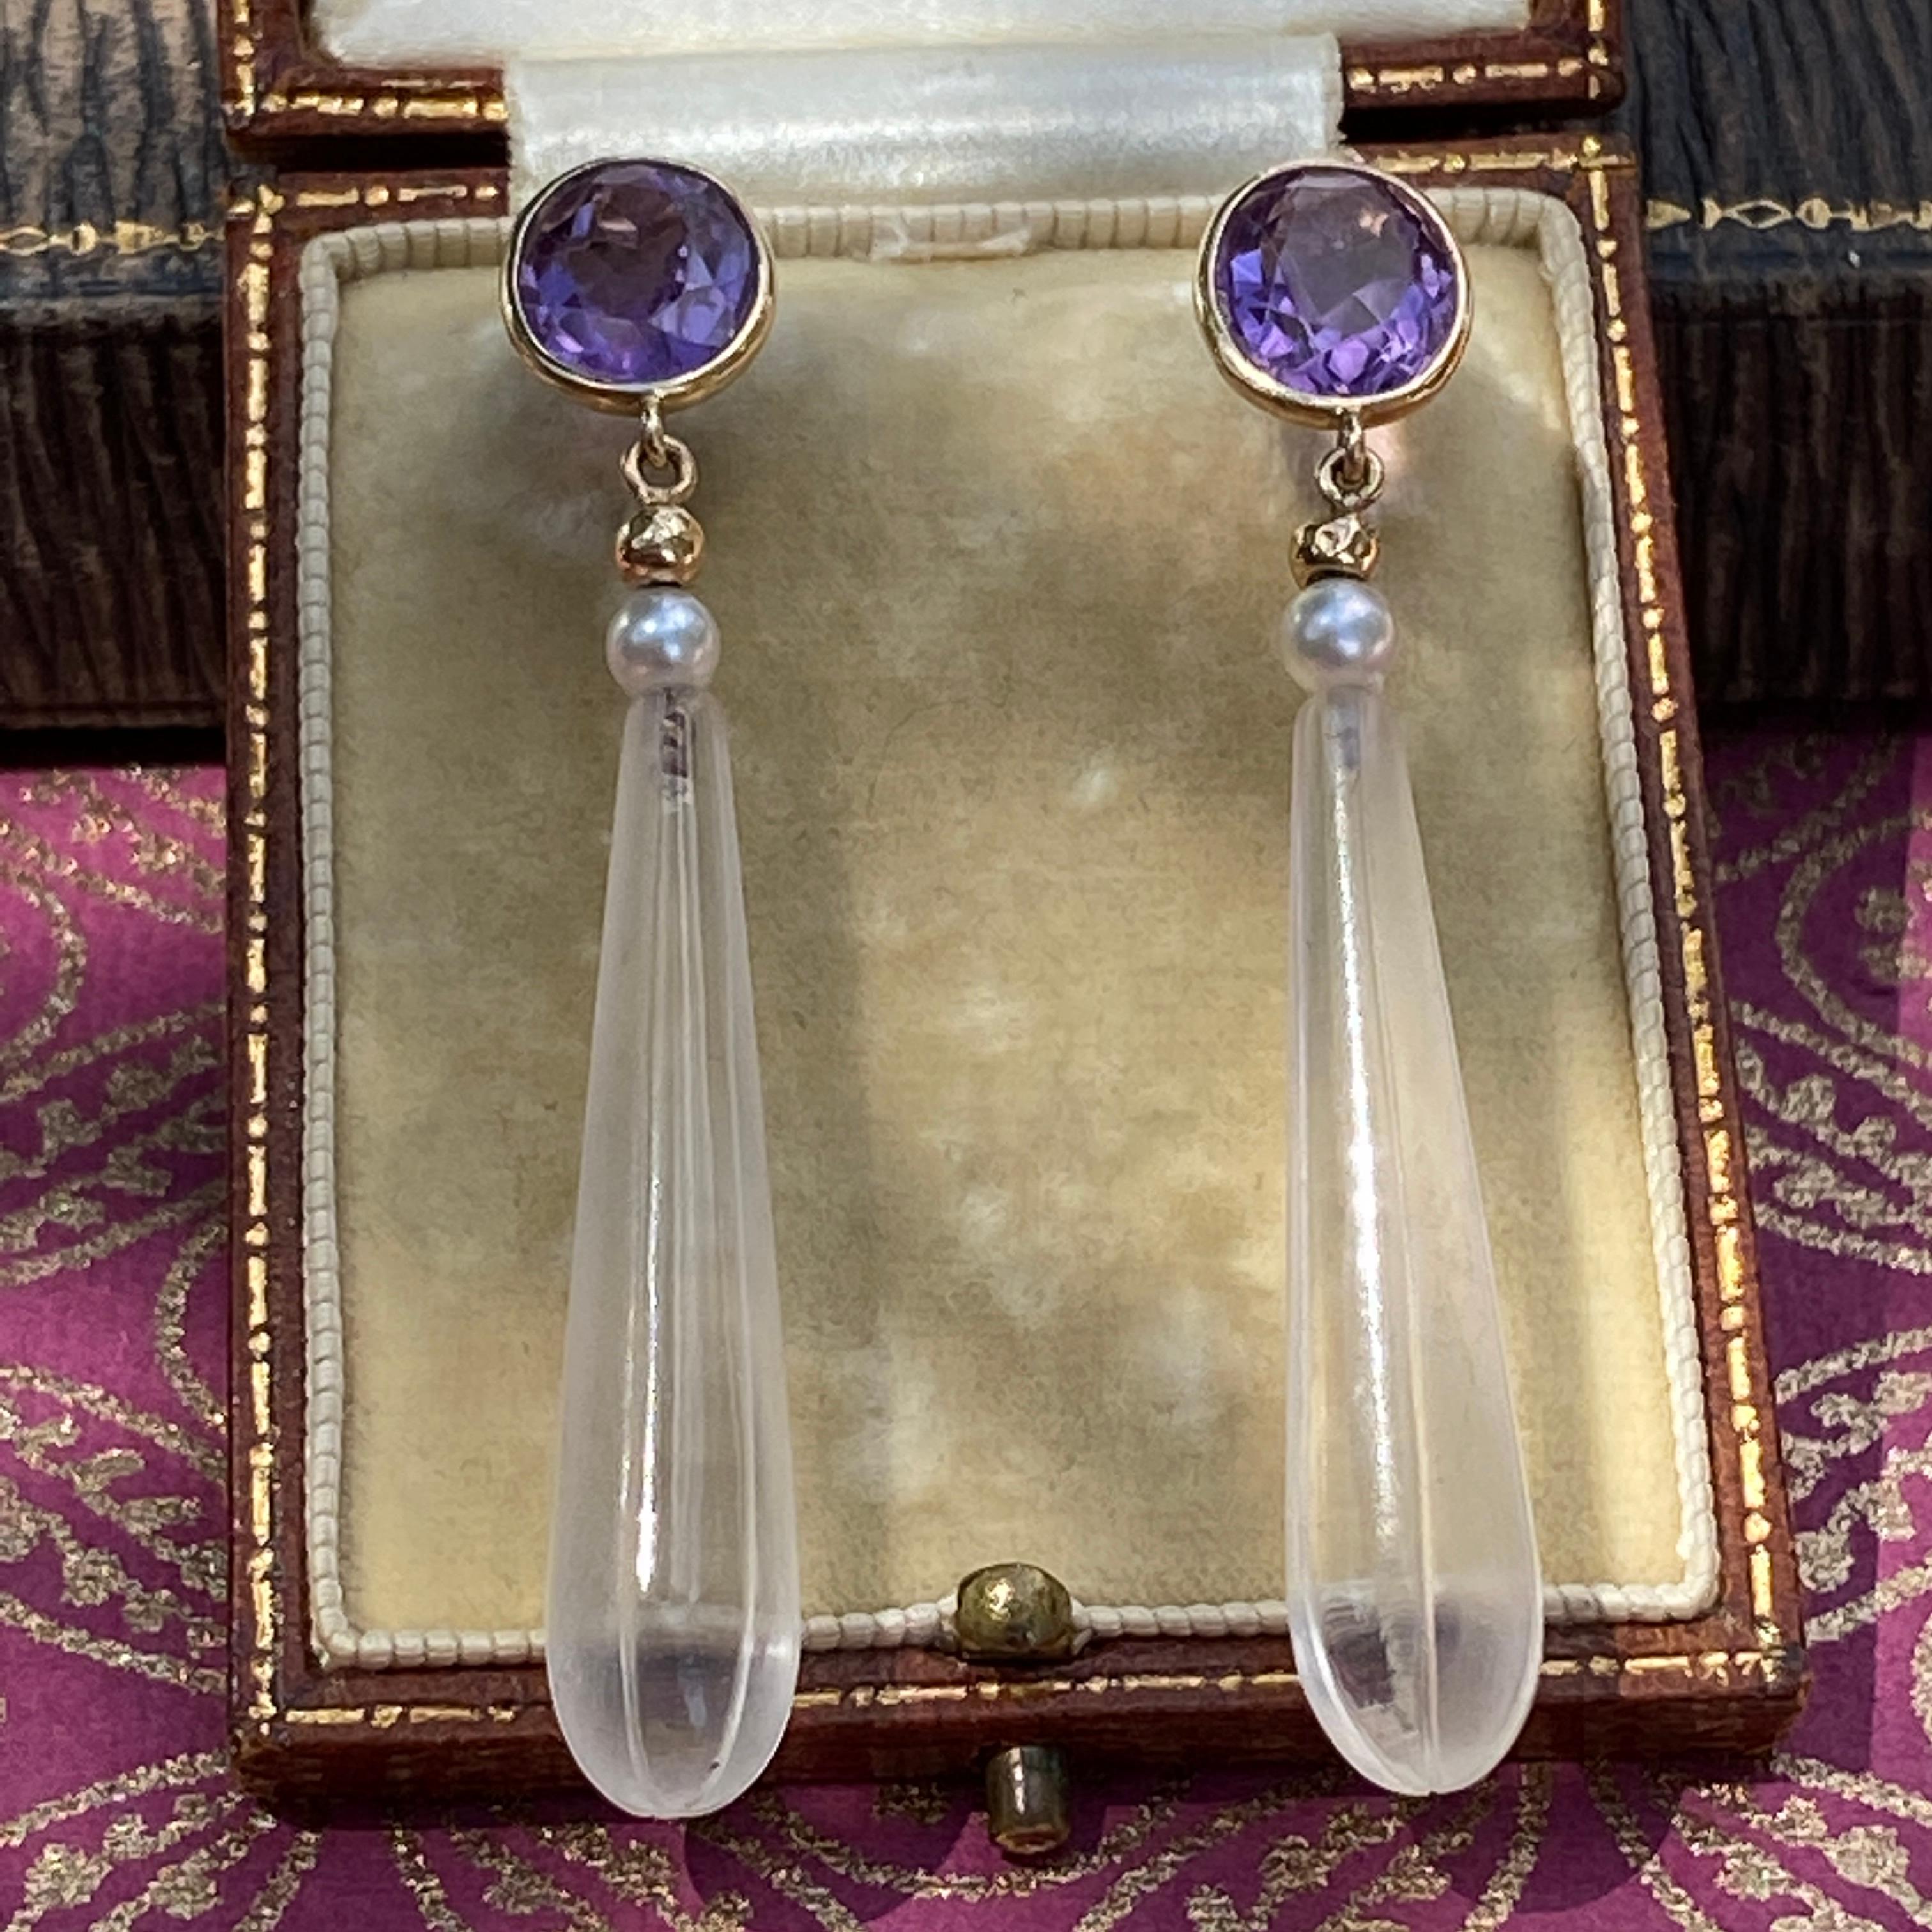 Details:
Beautiful vintage amethyst, rock crystal and pearl earrings set in 14K yellow gold. The round, faceted, natural amethyst are a lovely rich purple color, and the rock crystal drops have etched striping that adds dimension to the lovely